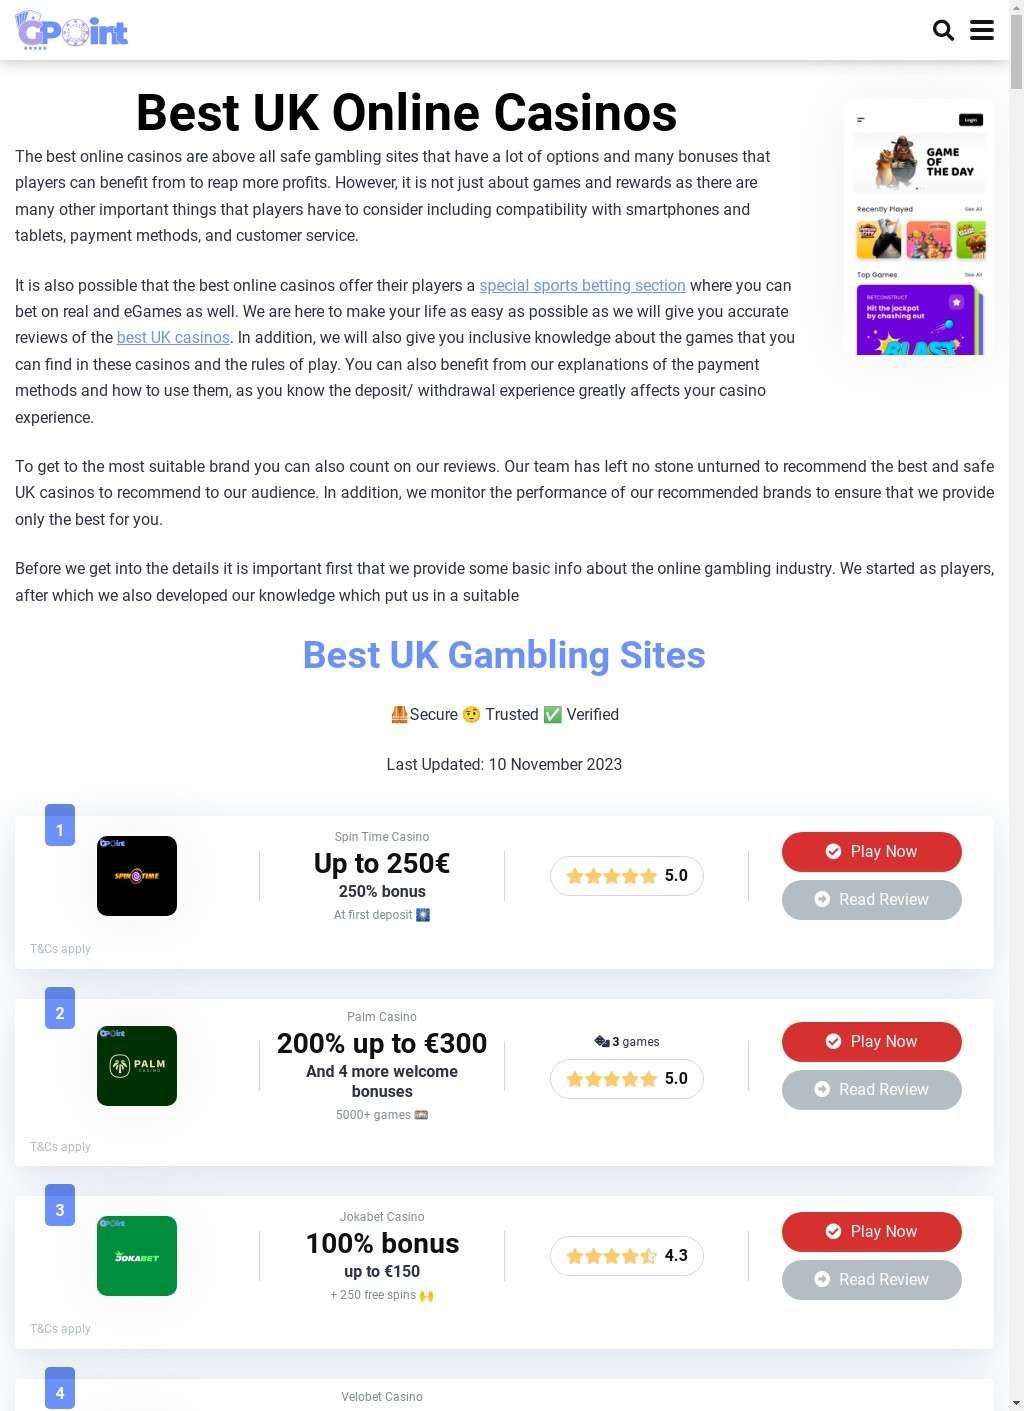 Best UK Casino Reviews and Listing